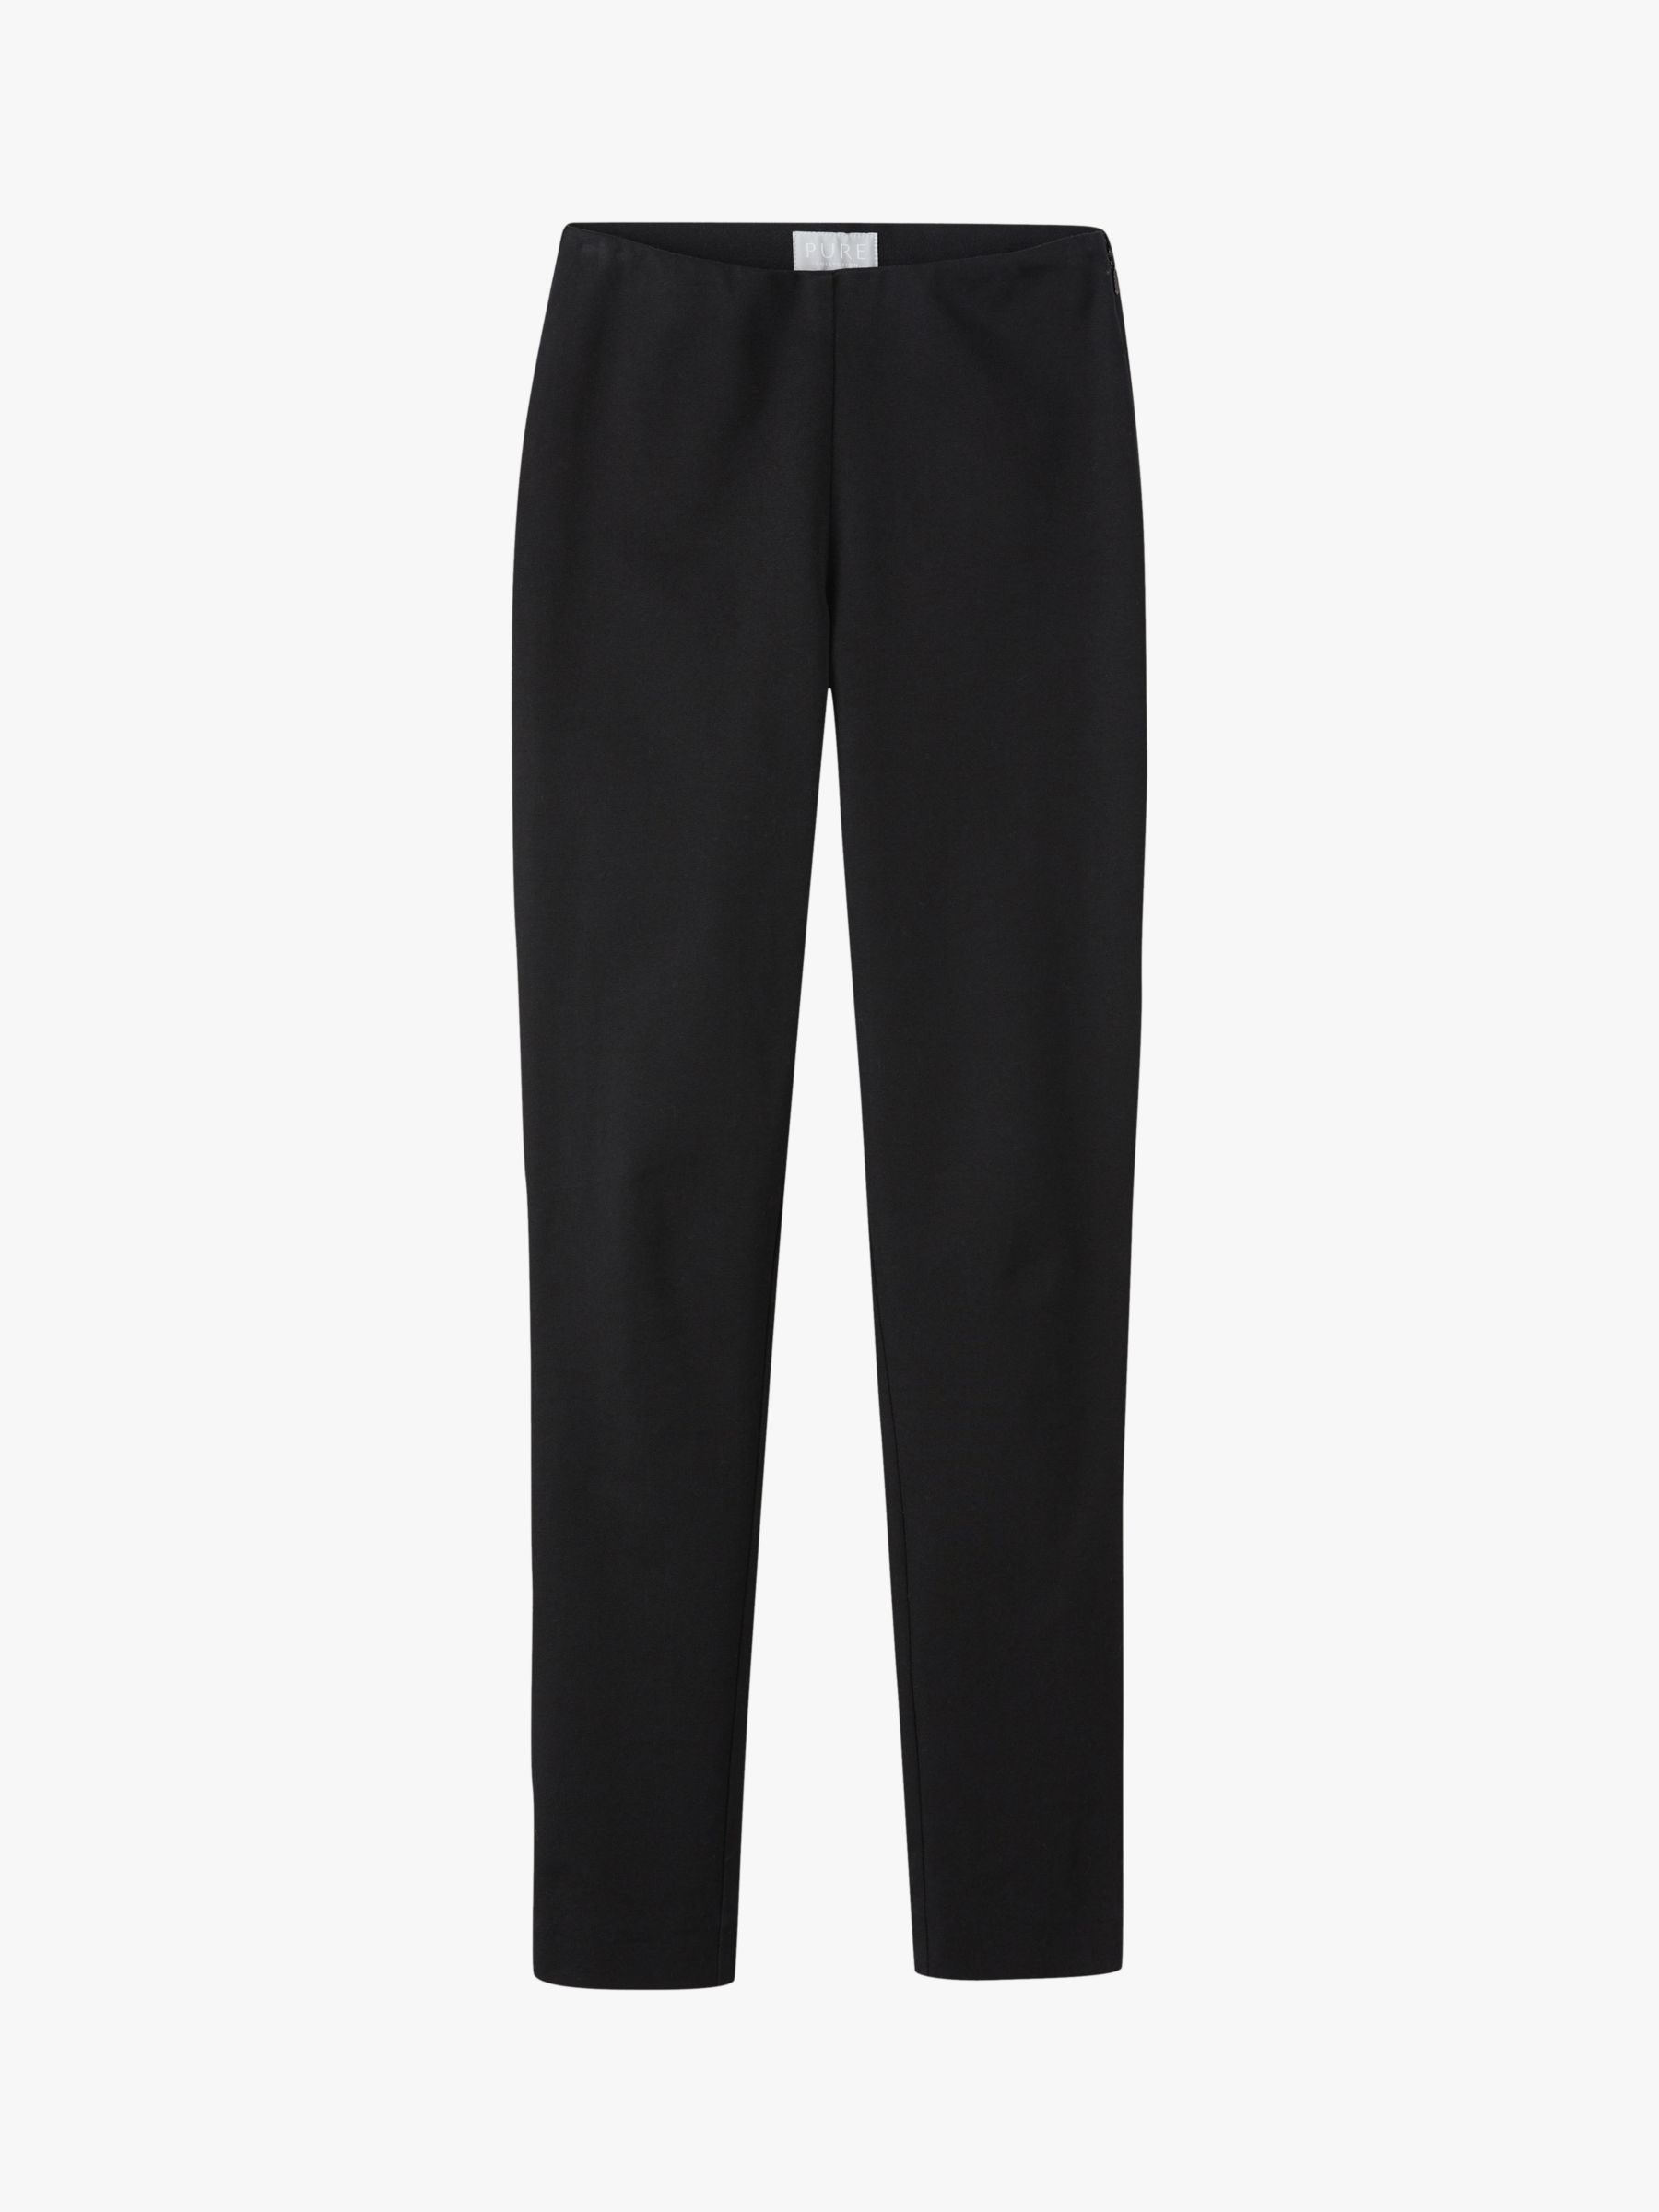 Pure Collection Cotton Stretch Trousers, Black at John Lewis & Partners